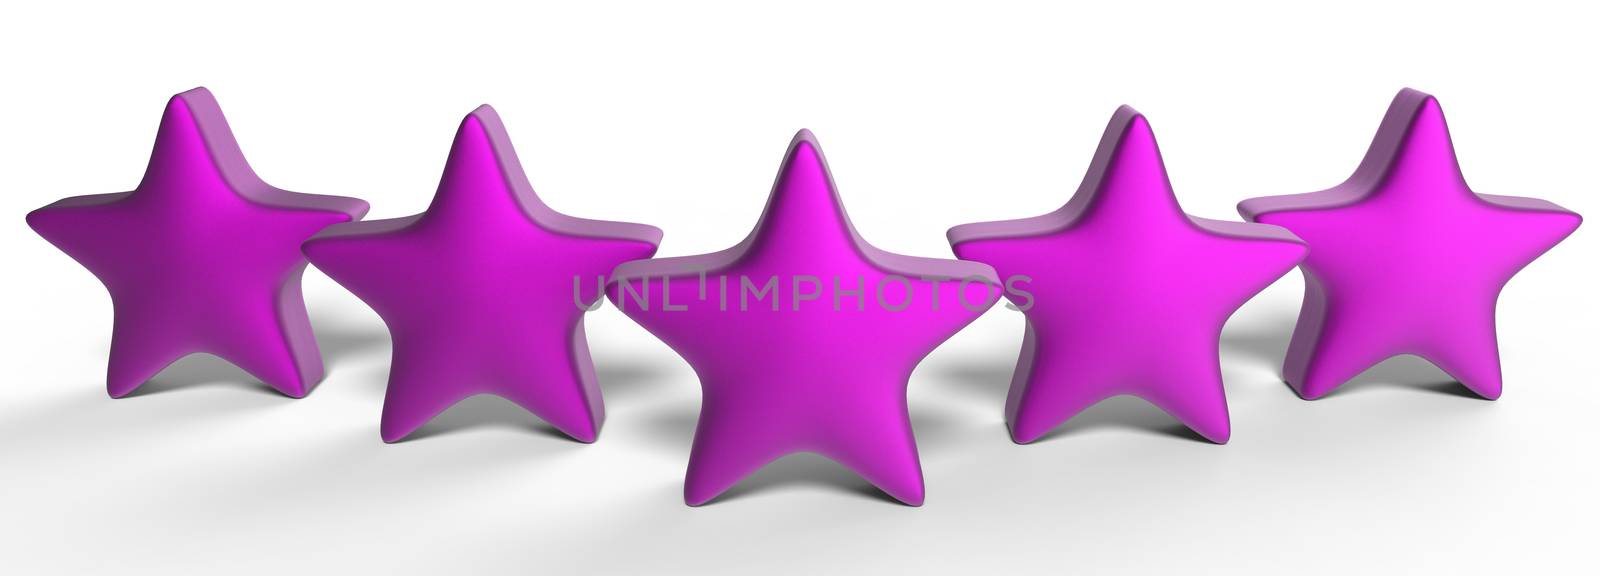 3d five purple star on color background. Render and illustration of golden star for premium review by Andreajk3